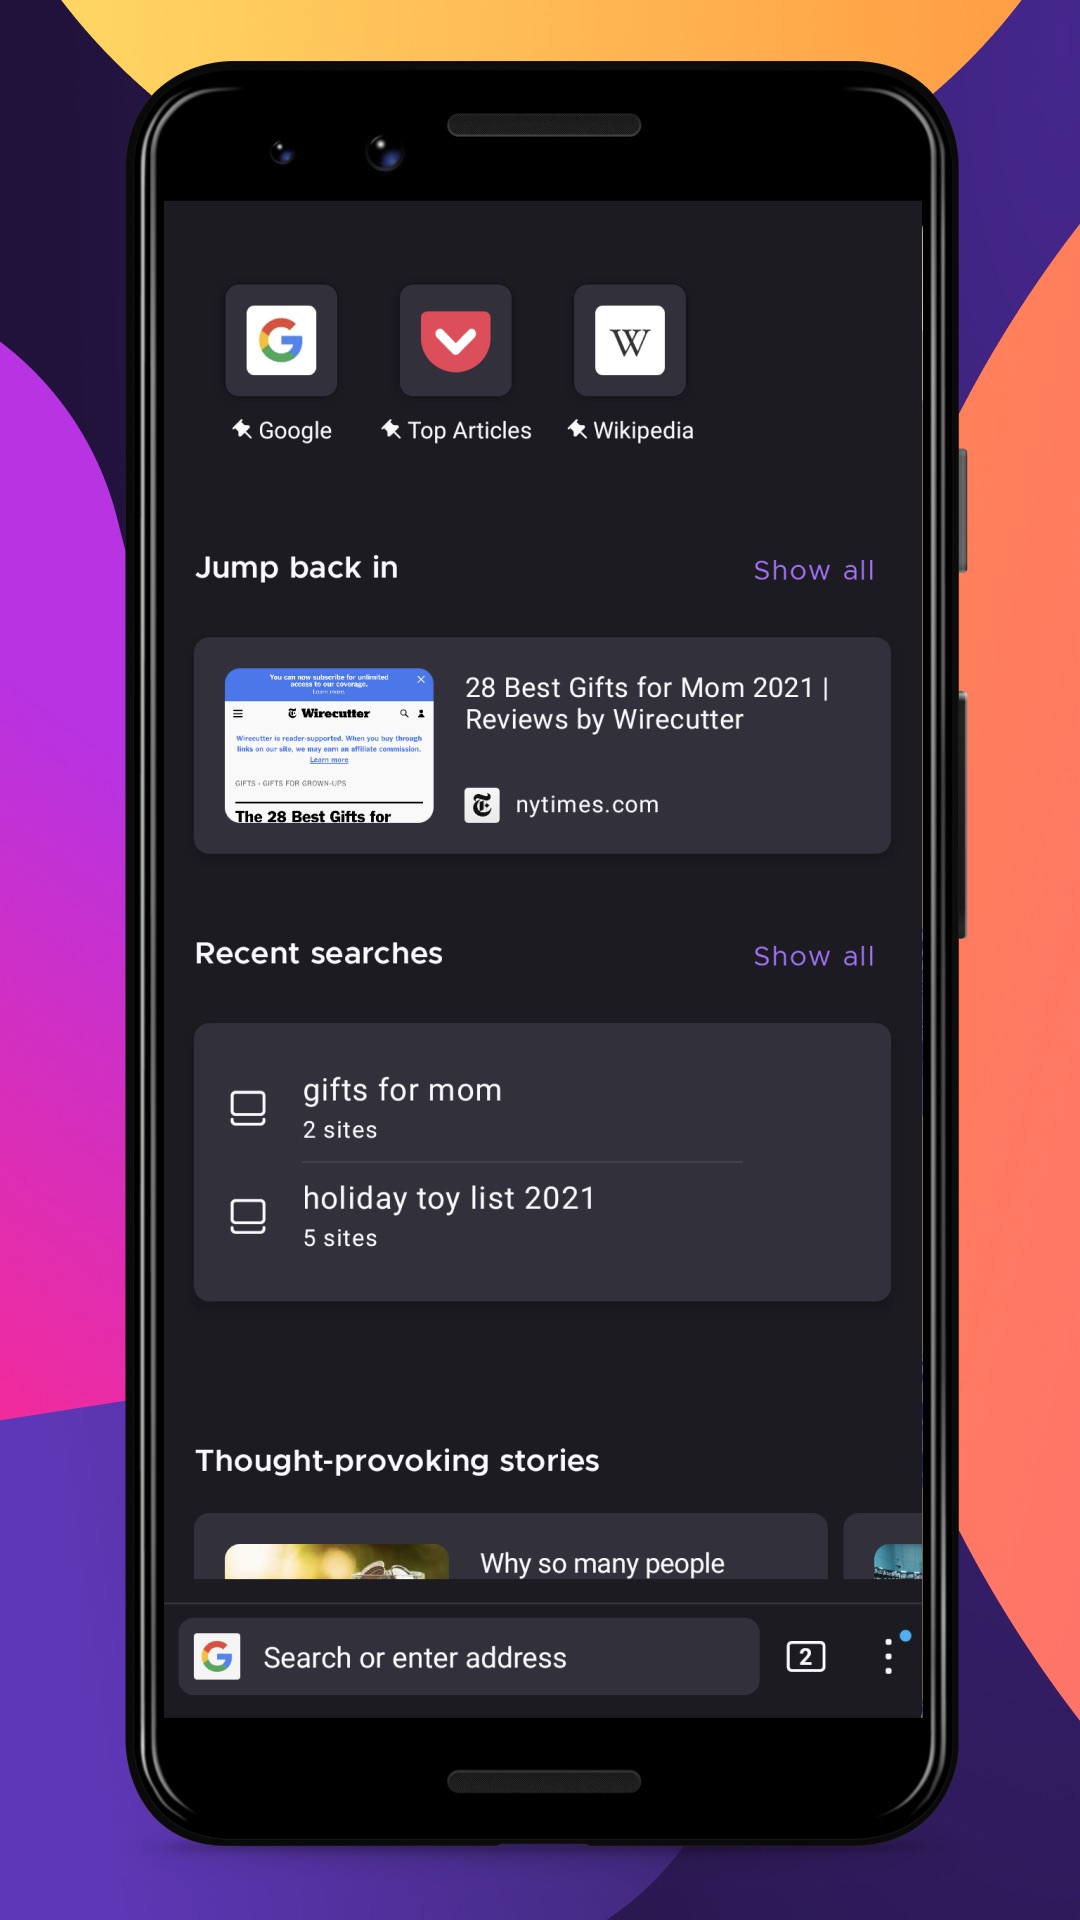 Mozilla Announces New Firefox Homepage for iOS and Android